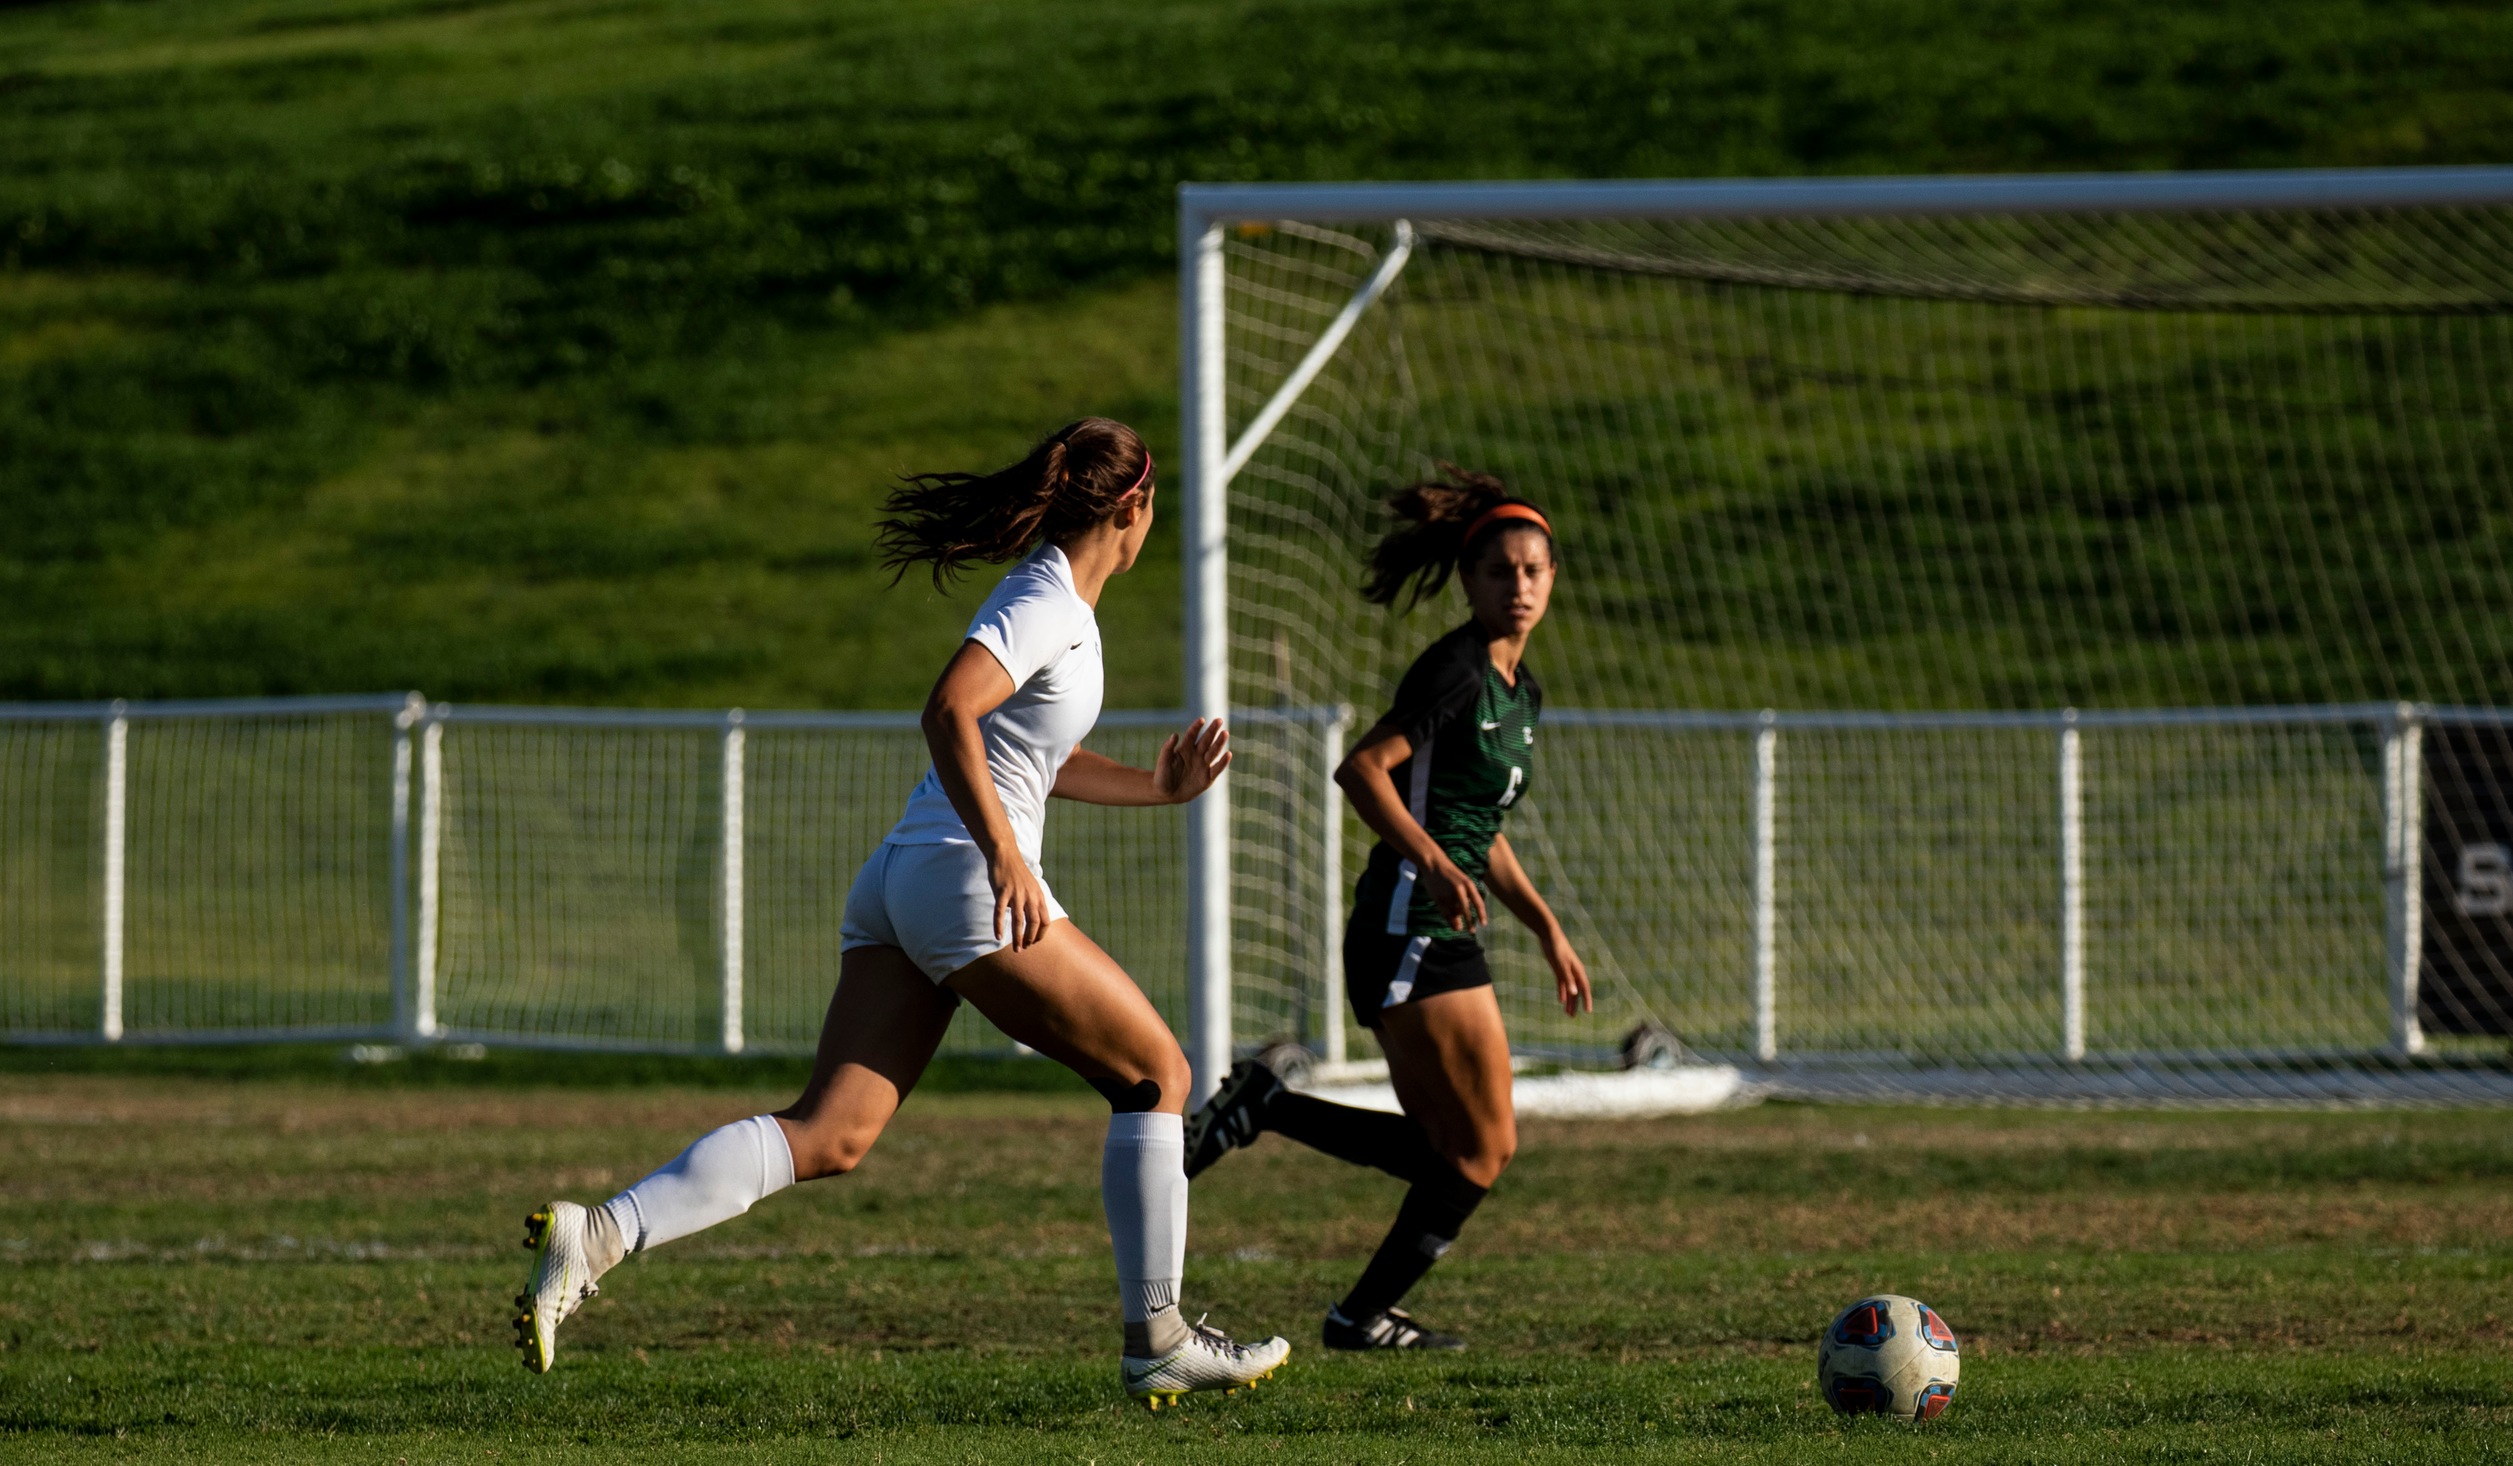 W Soccer: Loses Tough Match to #1 Ranked Cypress